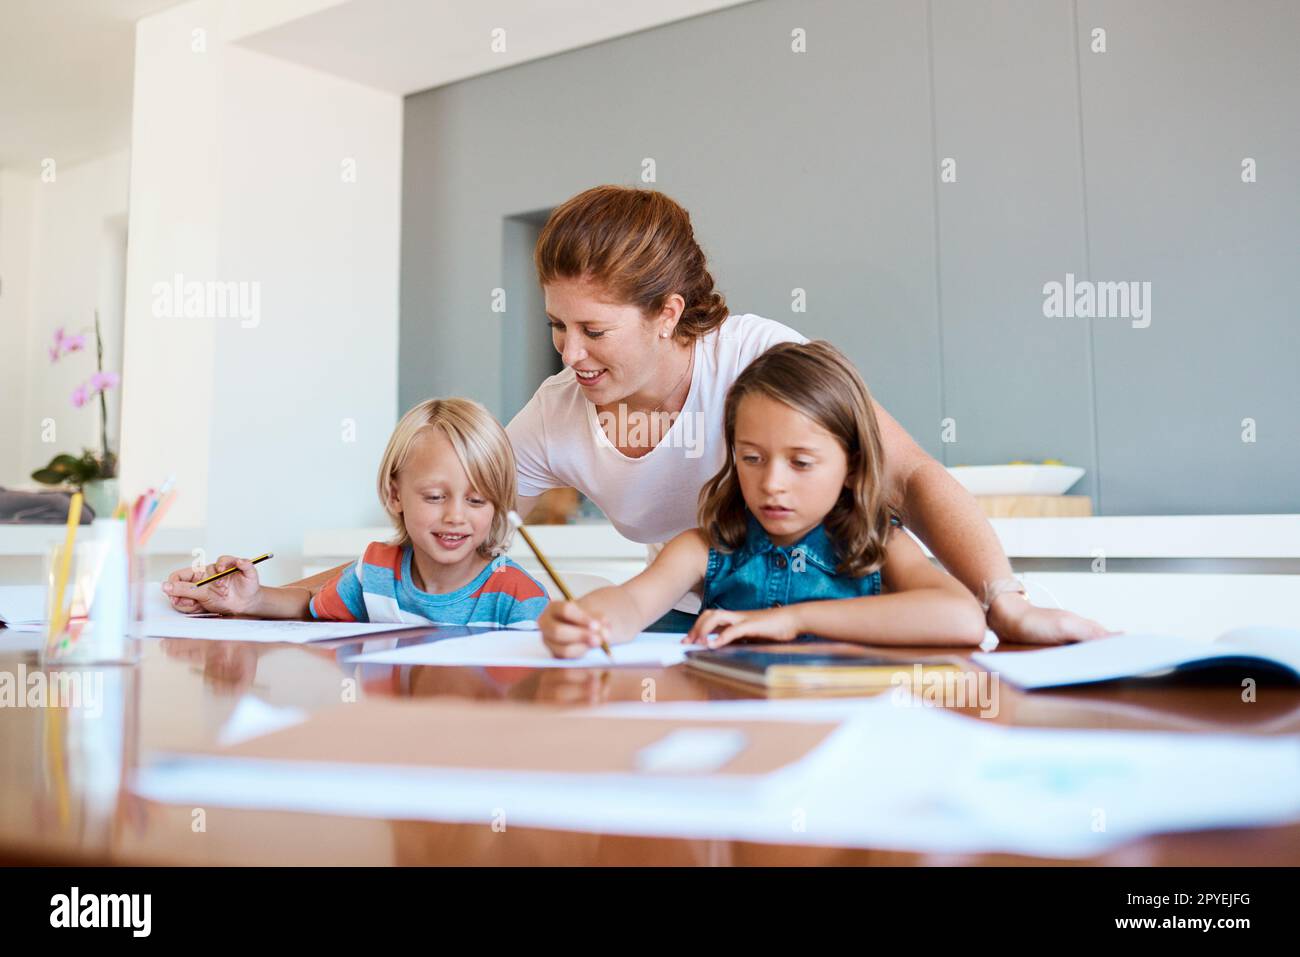 Make your home a happy learning environment. a young mother helping her two small children with their homework at home. Stock Photo